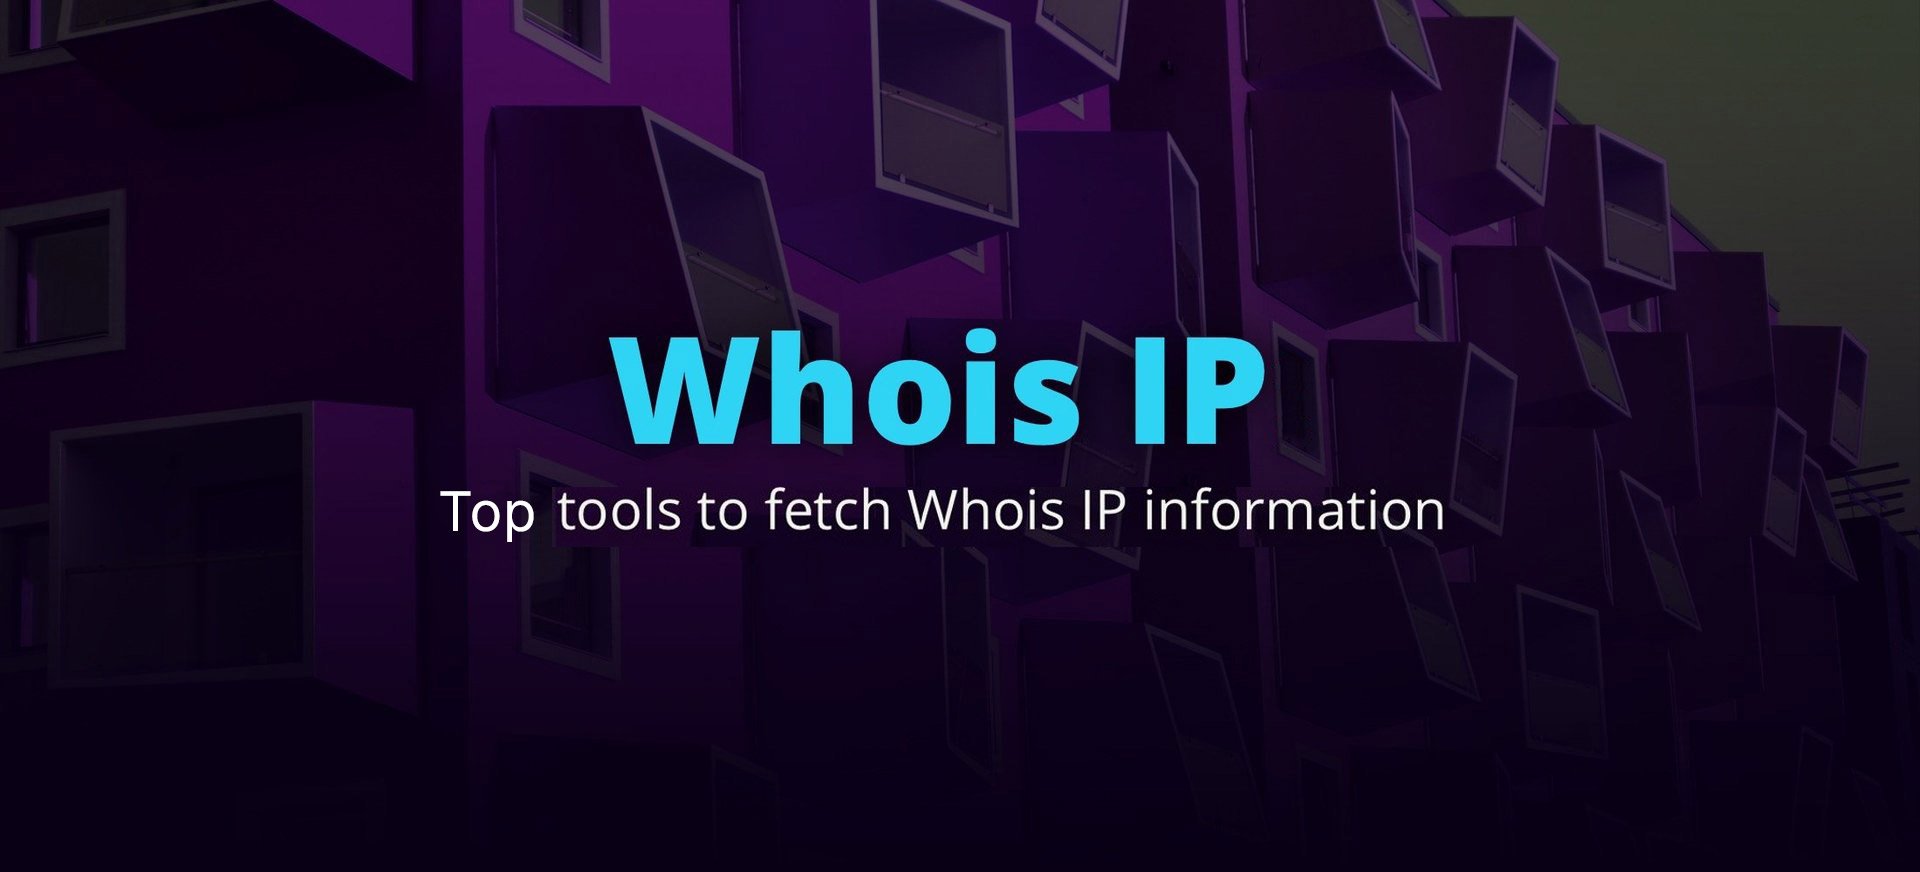 Find Out More about an IP Address via WHOIS Lookup and WHOIS API